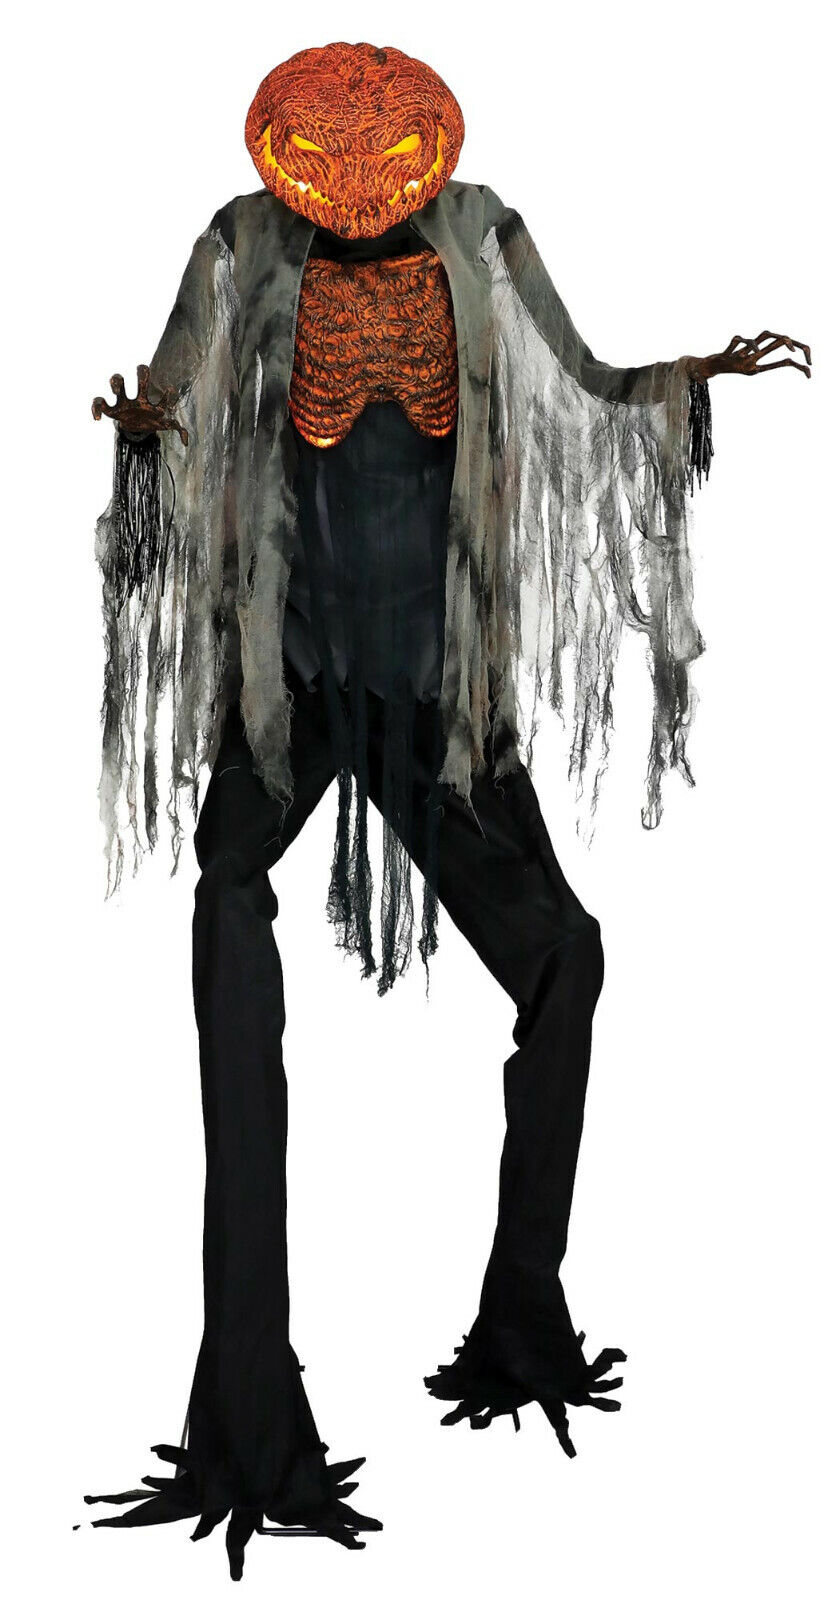 HALLOWEEN 7 FT ANIMATED SCORCHED SCARECROW PUMPKIN MAN PROP HAUNTED HOUSE 